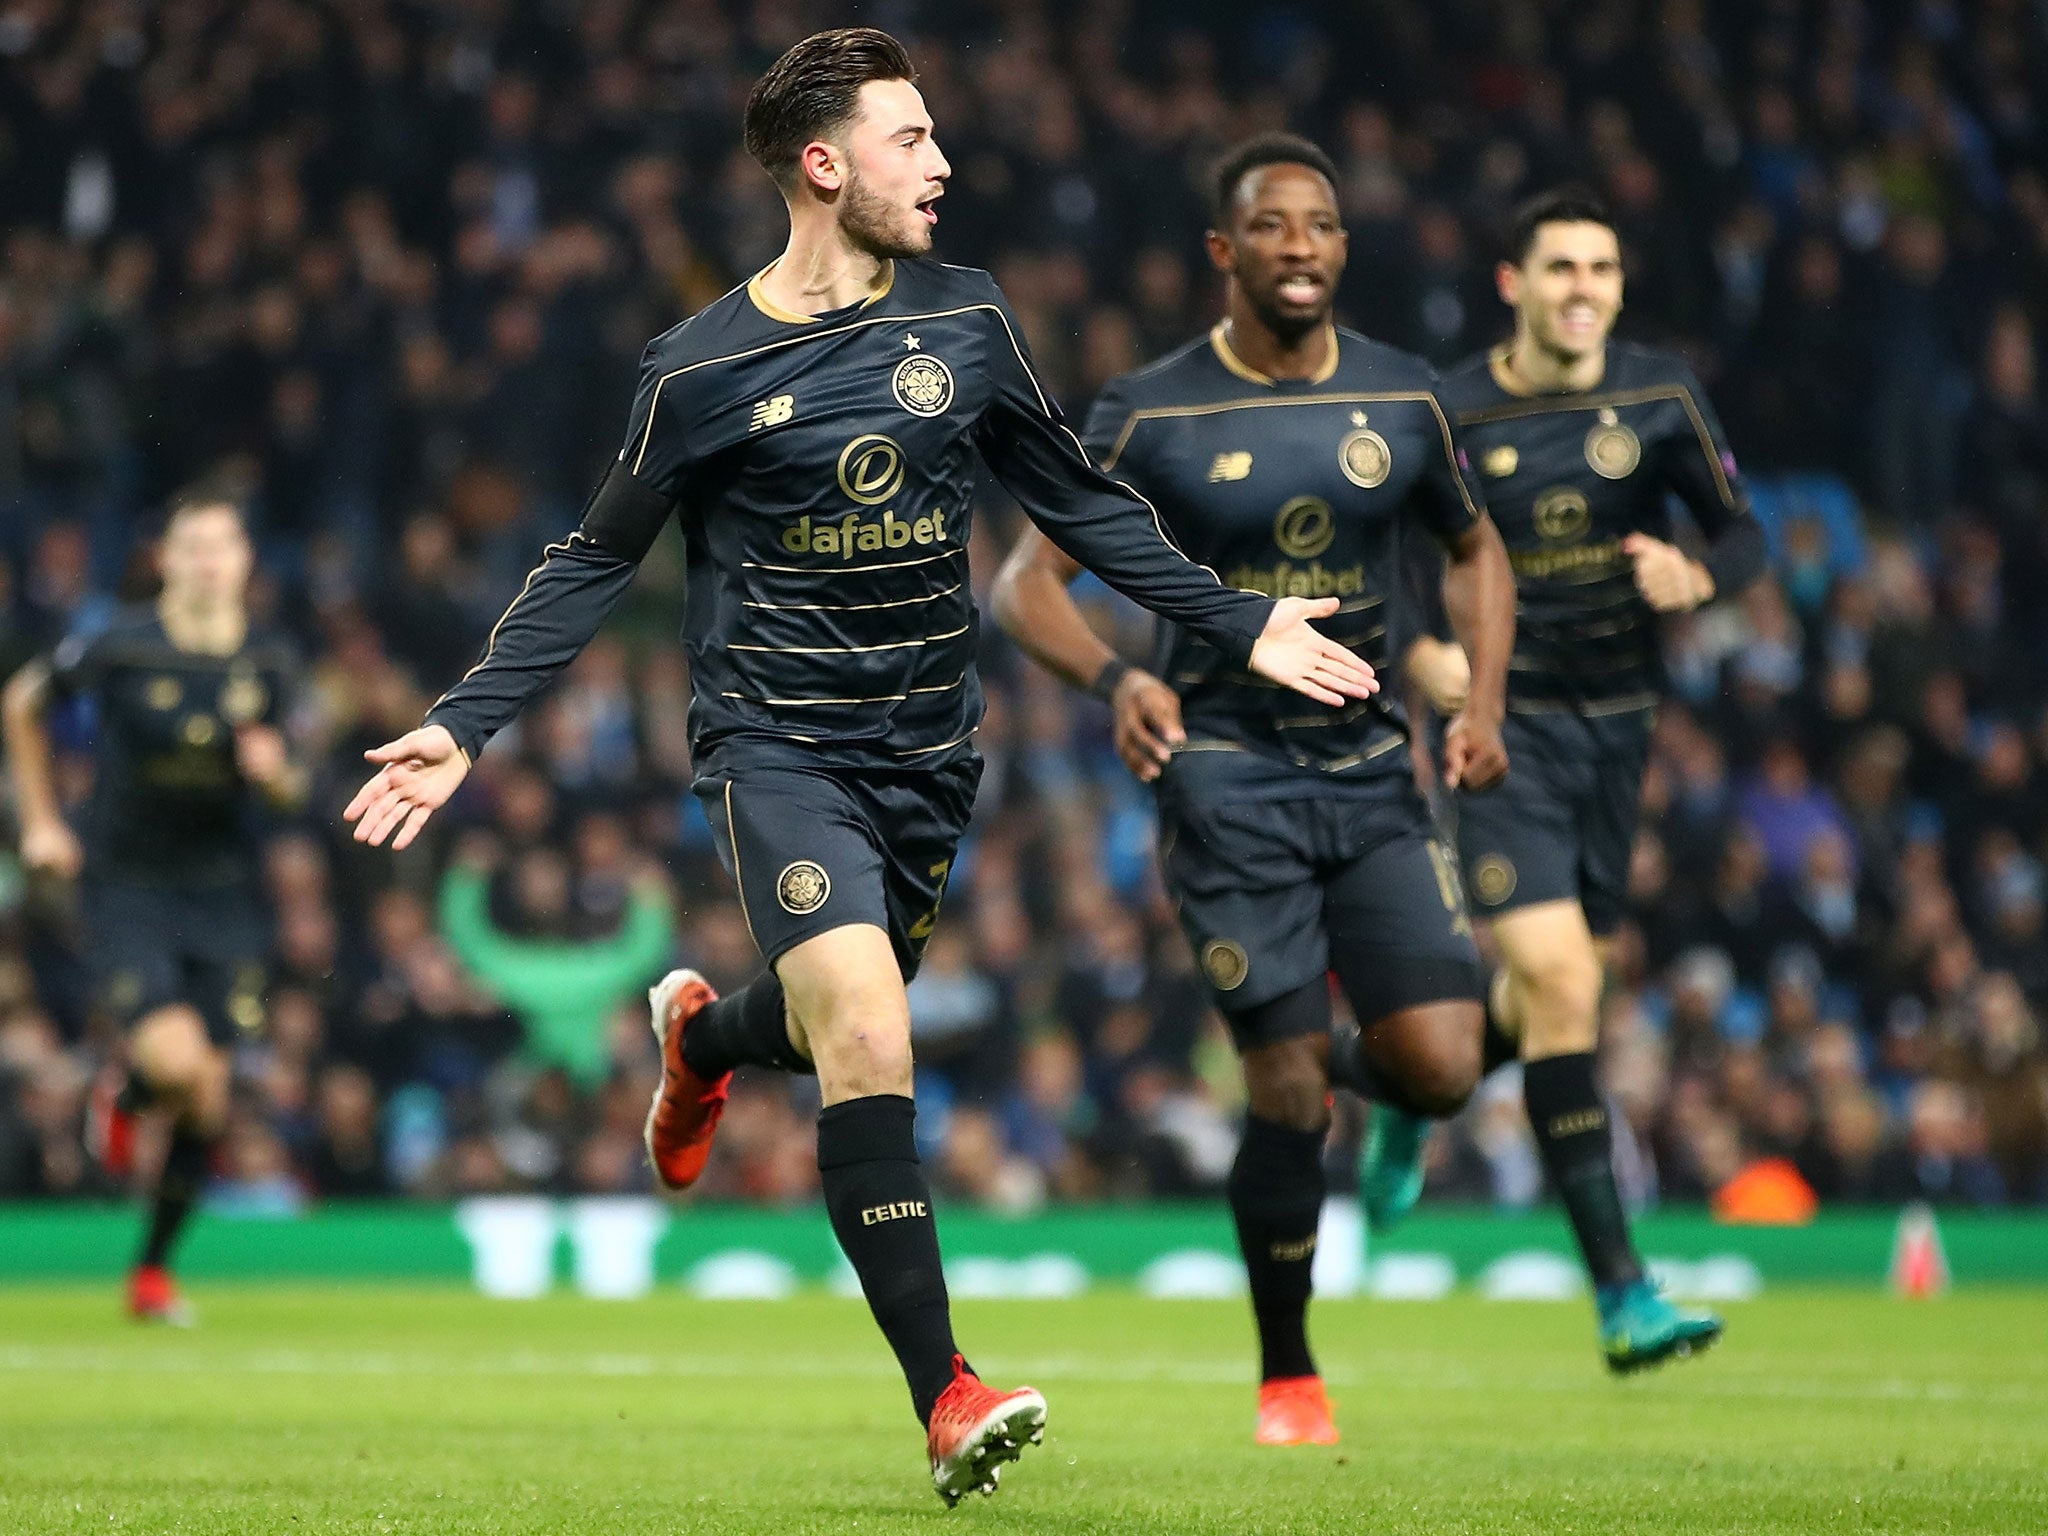 Patrick Roberts opened the scoring for the visitors after just four minutes